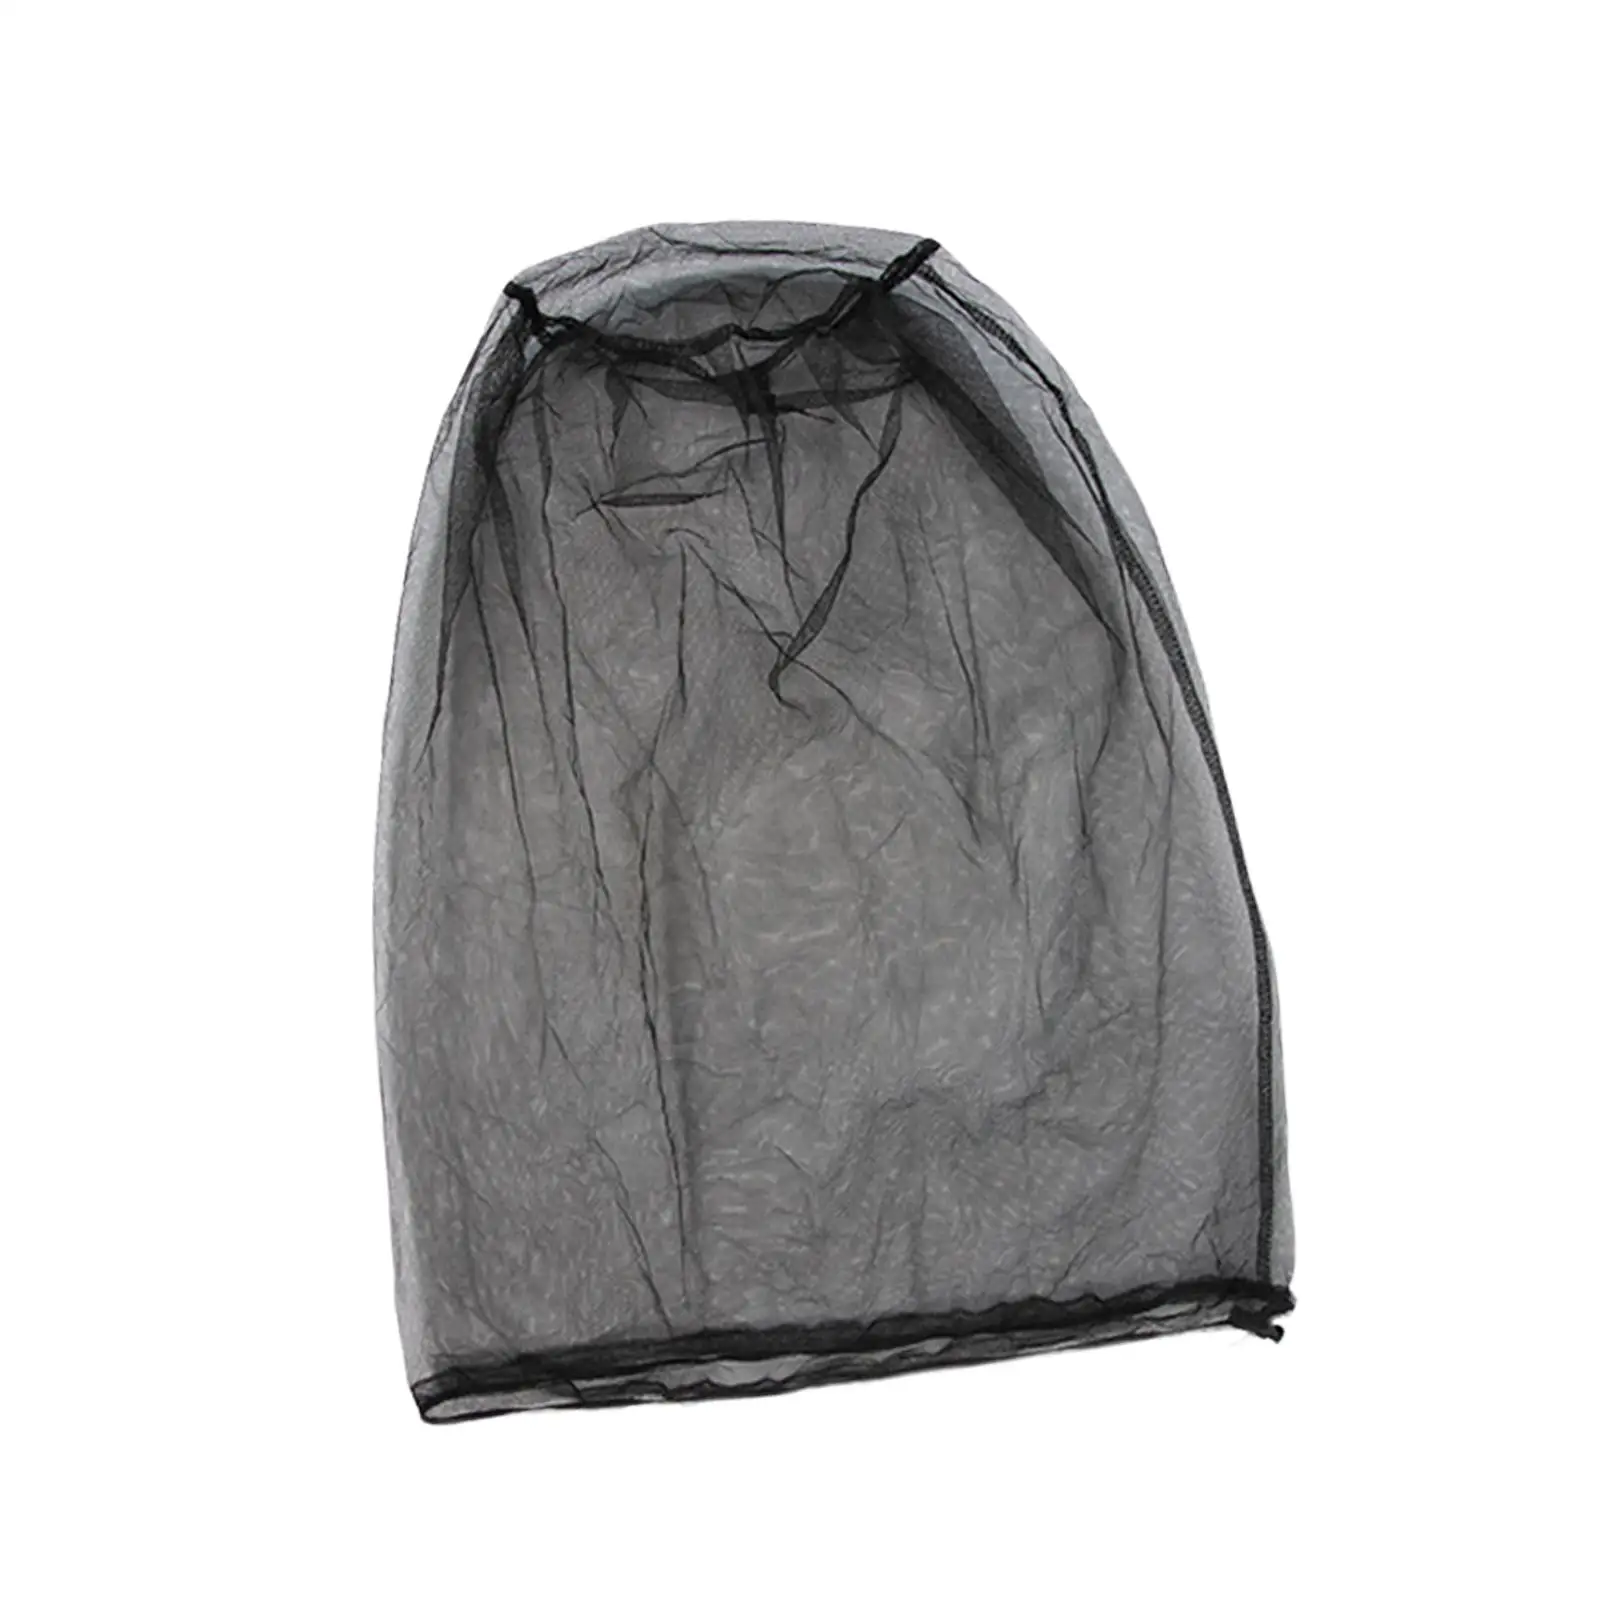 Mosquito Head Net Drawstring Men Women Breathable with Storage Bag for Camping Travel Outdoor Activity Climbing Fishing